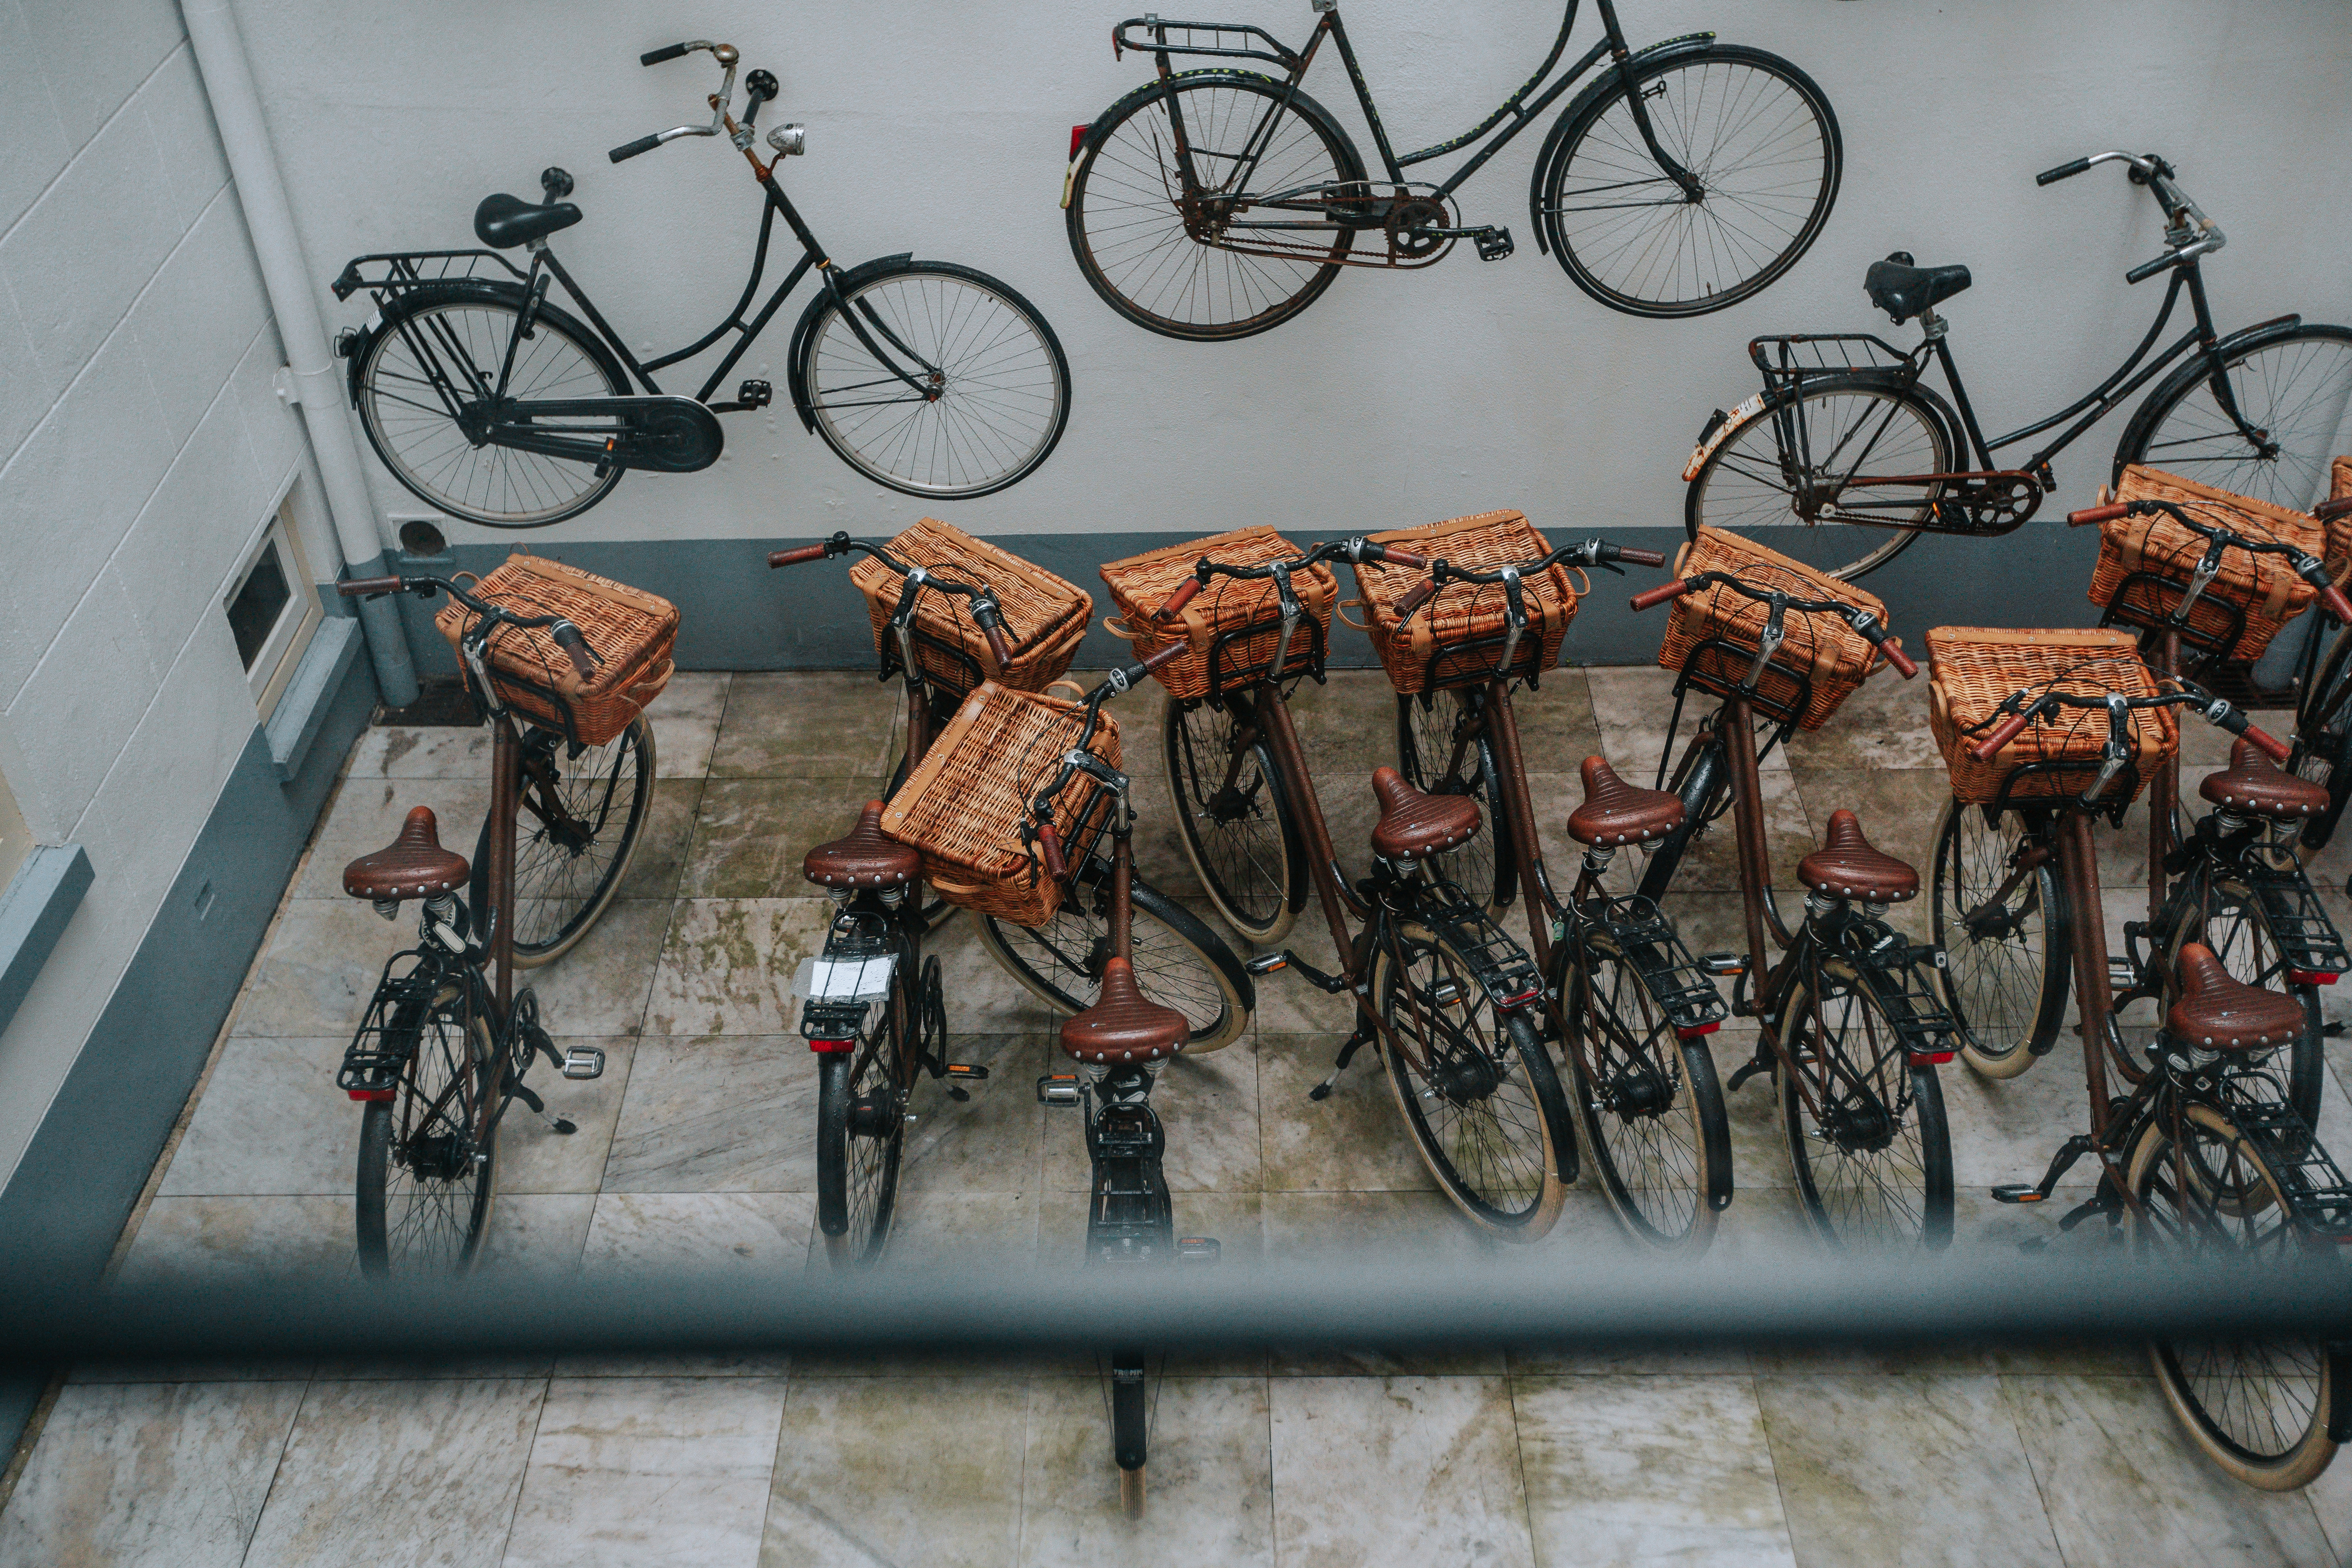 bicycles outside the window